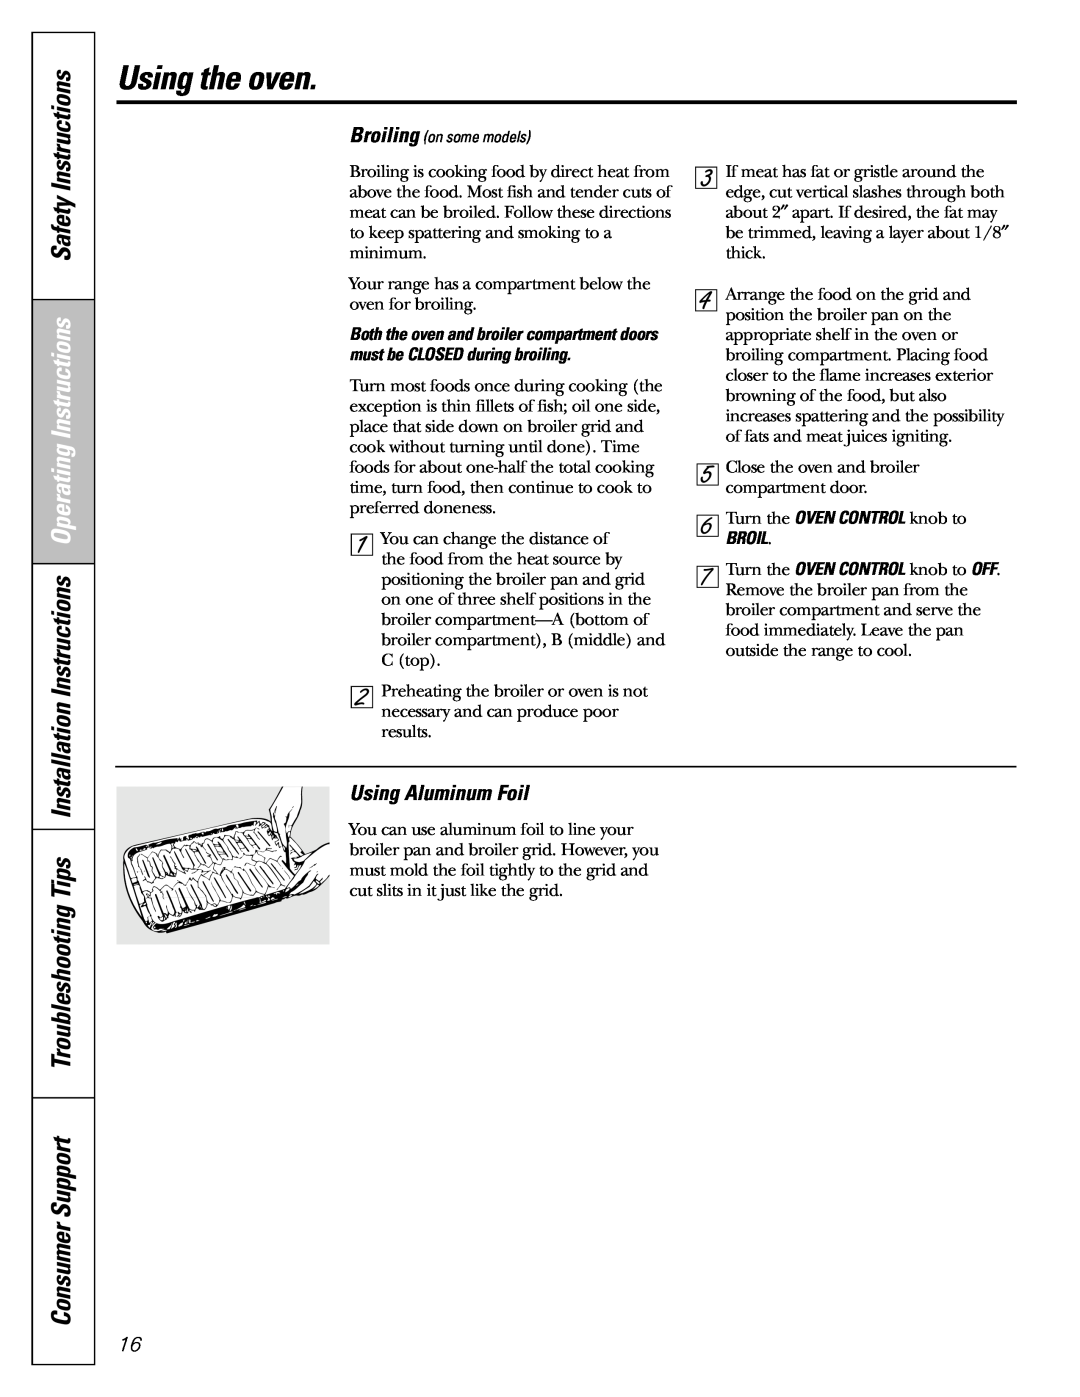 GE JGBS80 Consumer Support Troubleshooting Tips, Using the oven, Instructions, Using Aluminum Foil, Broil 